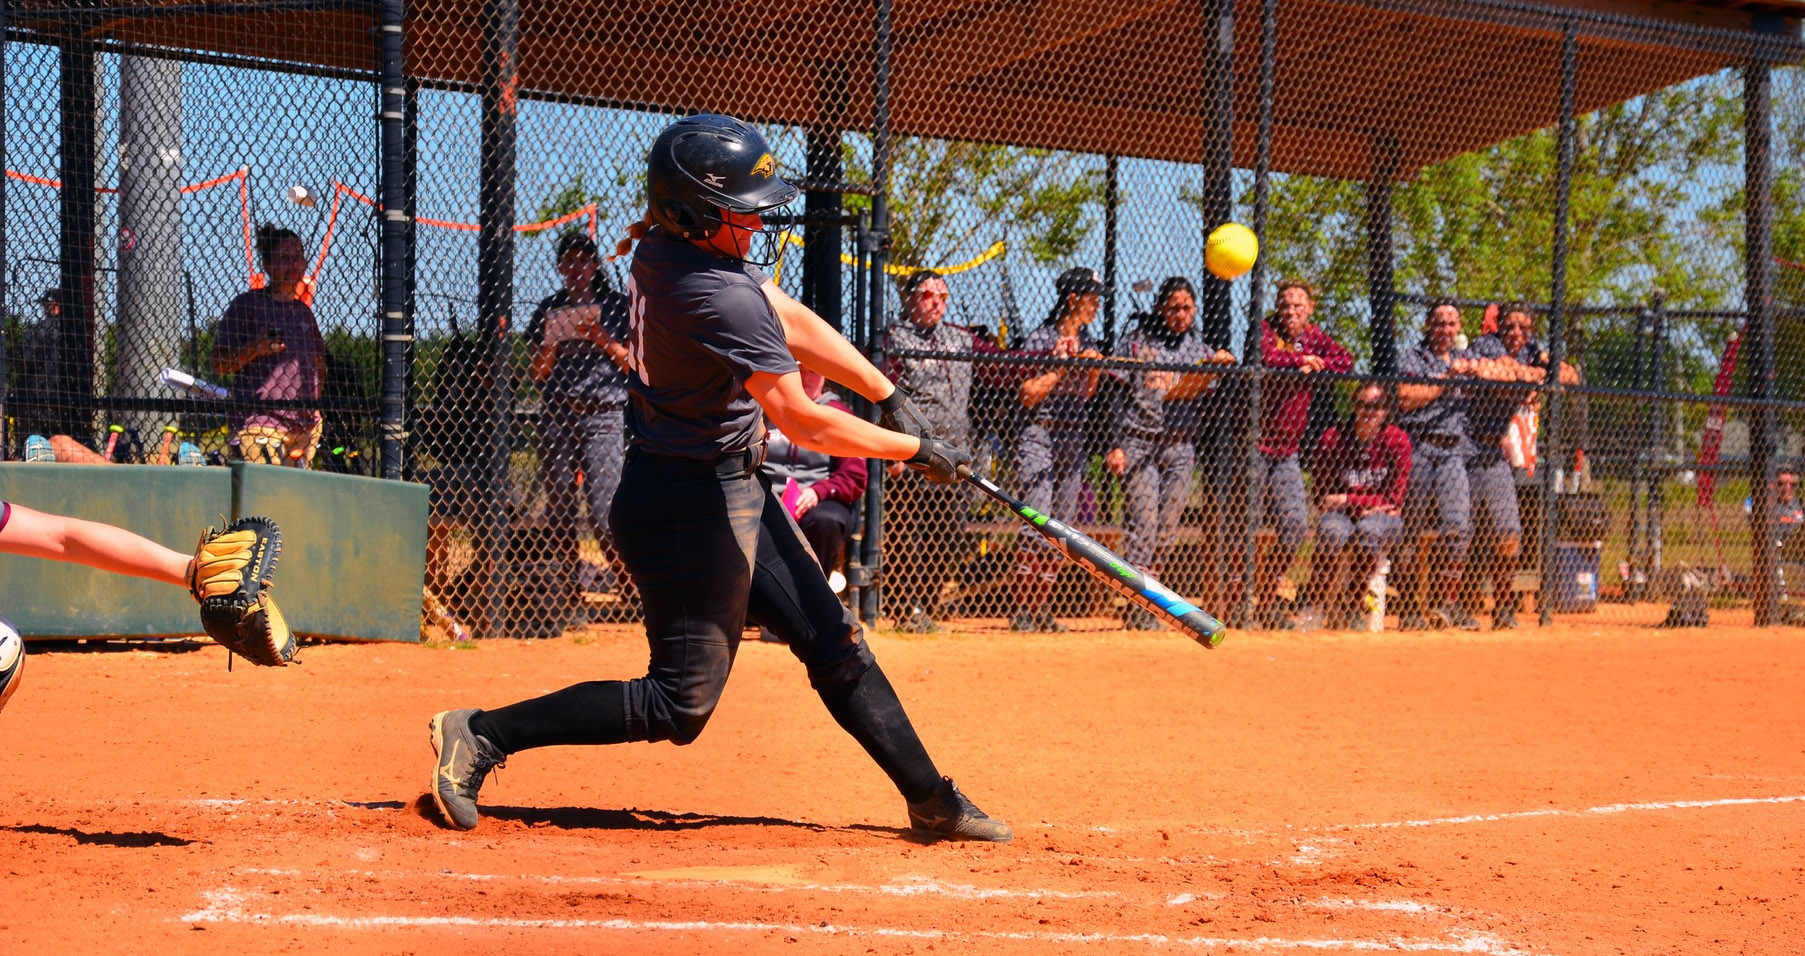 Erika Berry went 3-for-5 with a double, triple and three runs during the Titans' win over the Maroons.